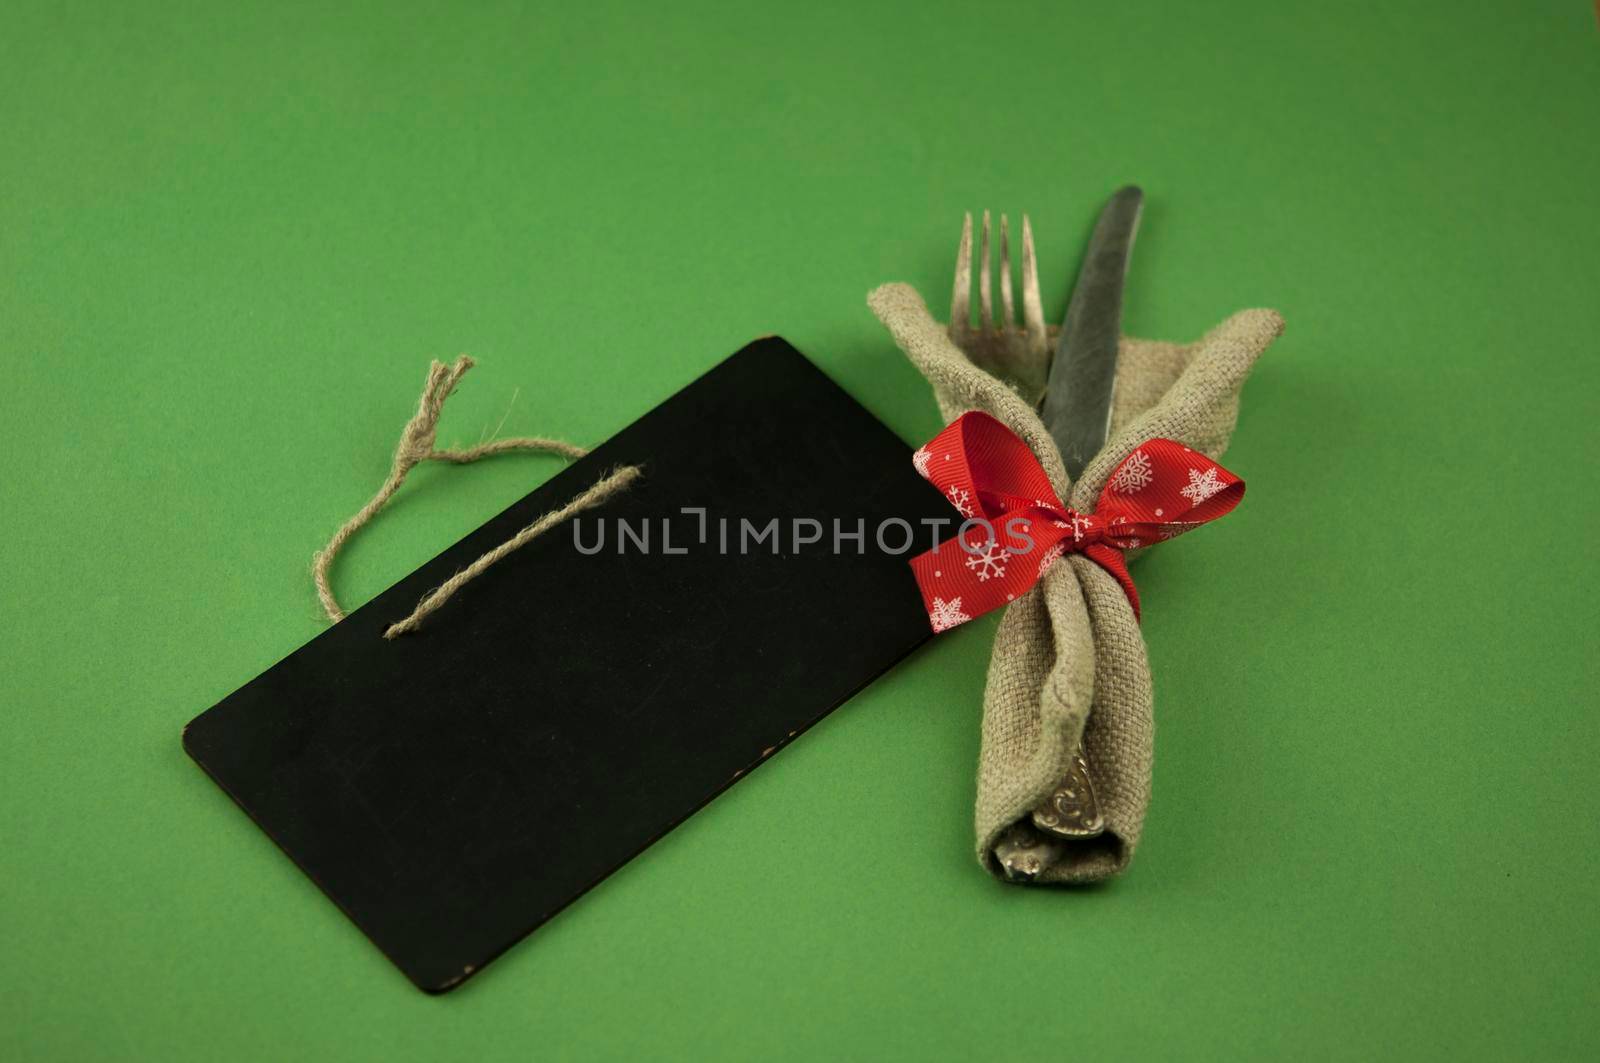 Vintage silverware decorated with red ribbon by inxti